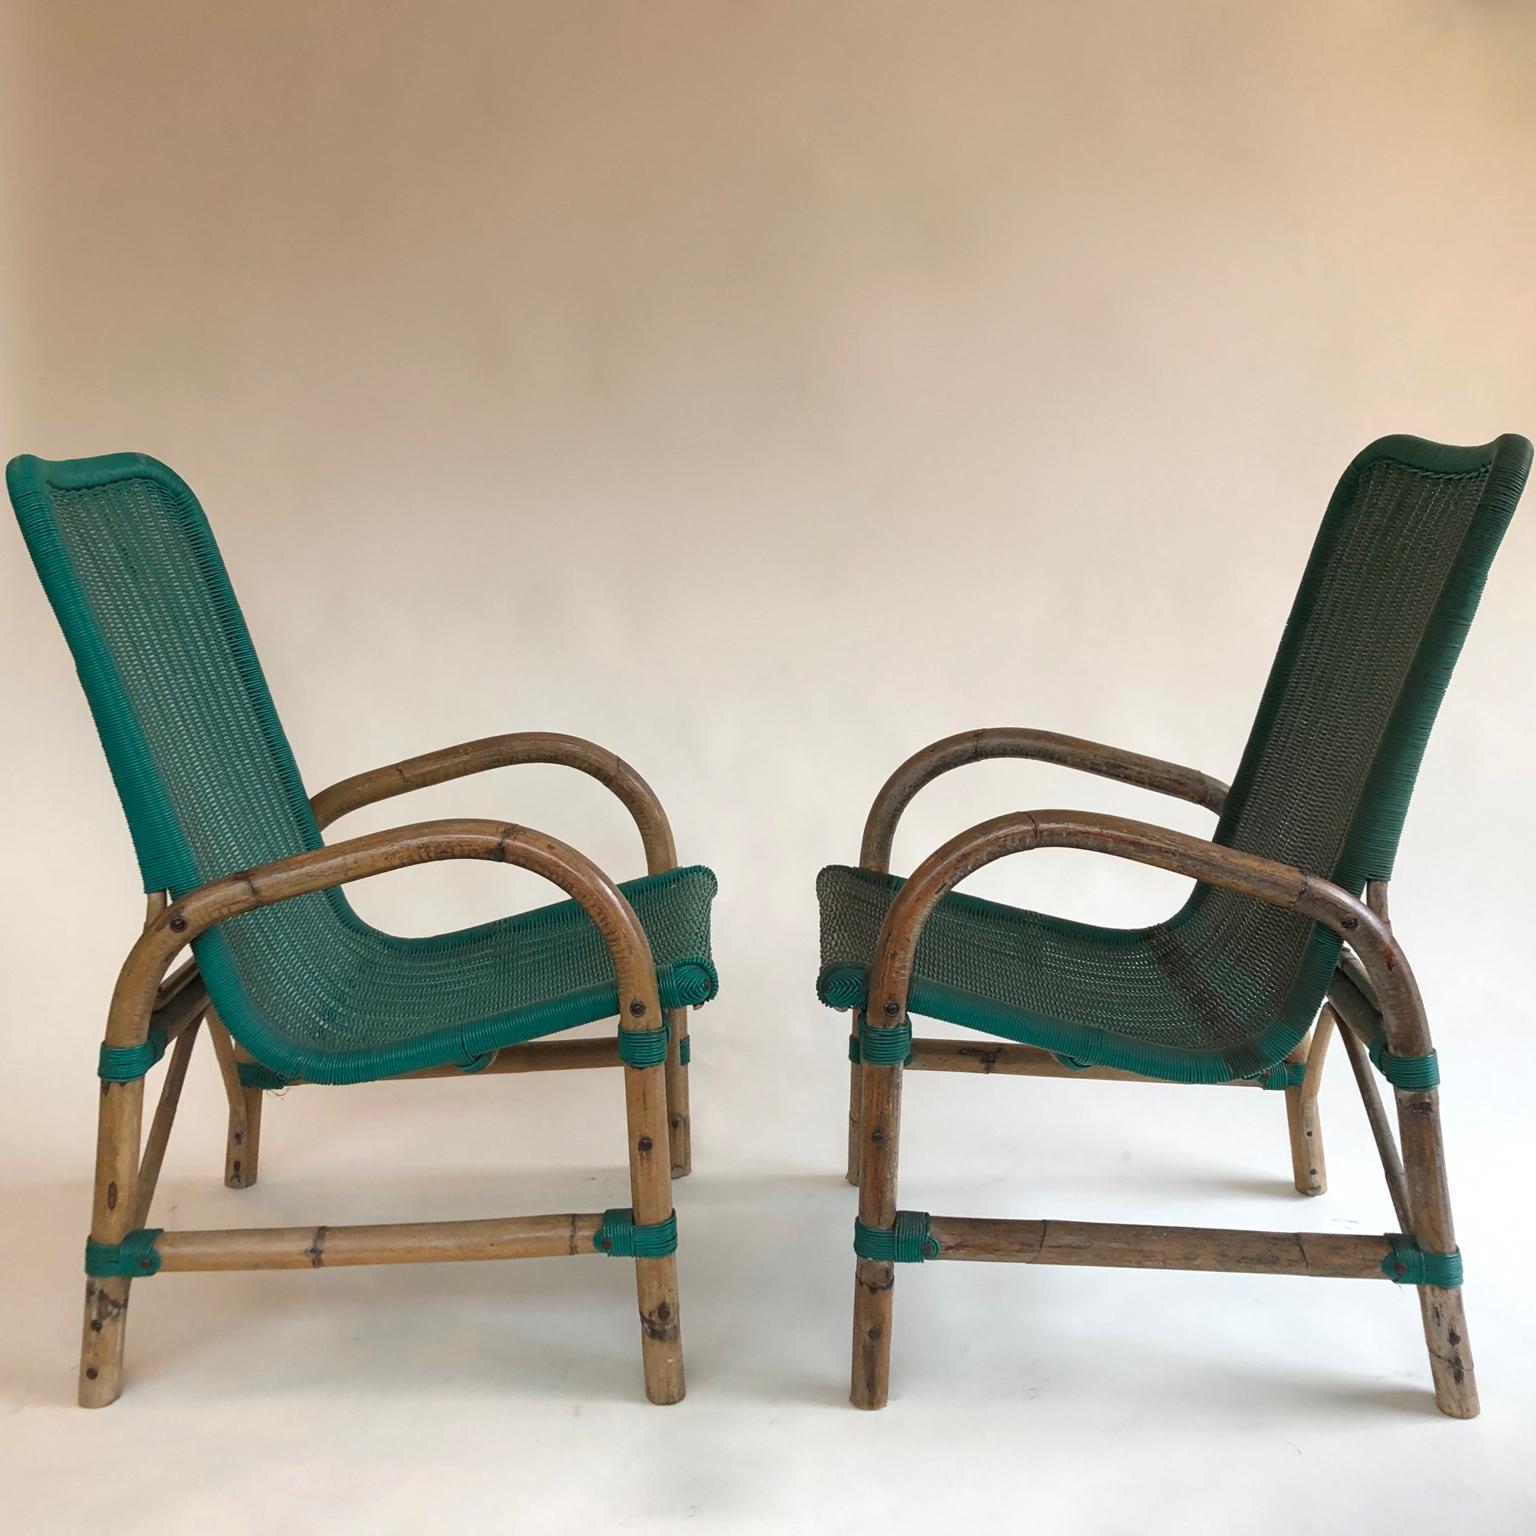 Comfortable high back bamboo rattan armchairs with an amazing green thin plastic webbing seats, 1950s-1960s, a pair by Rotan, Torino. Untouched but could easily be polished if needed.